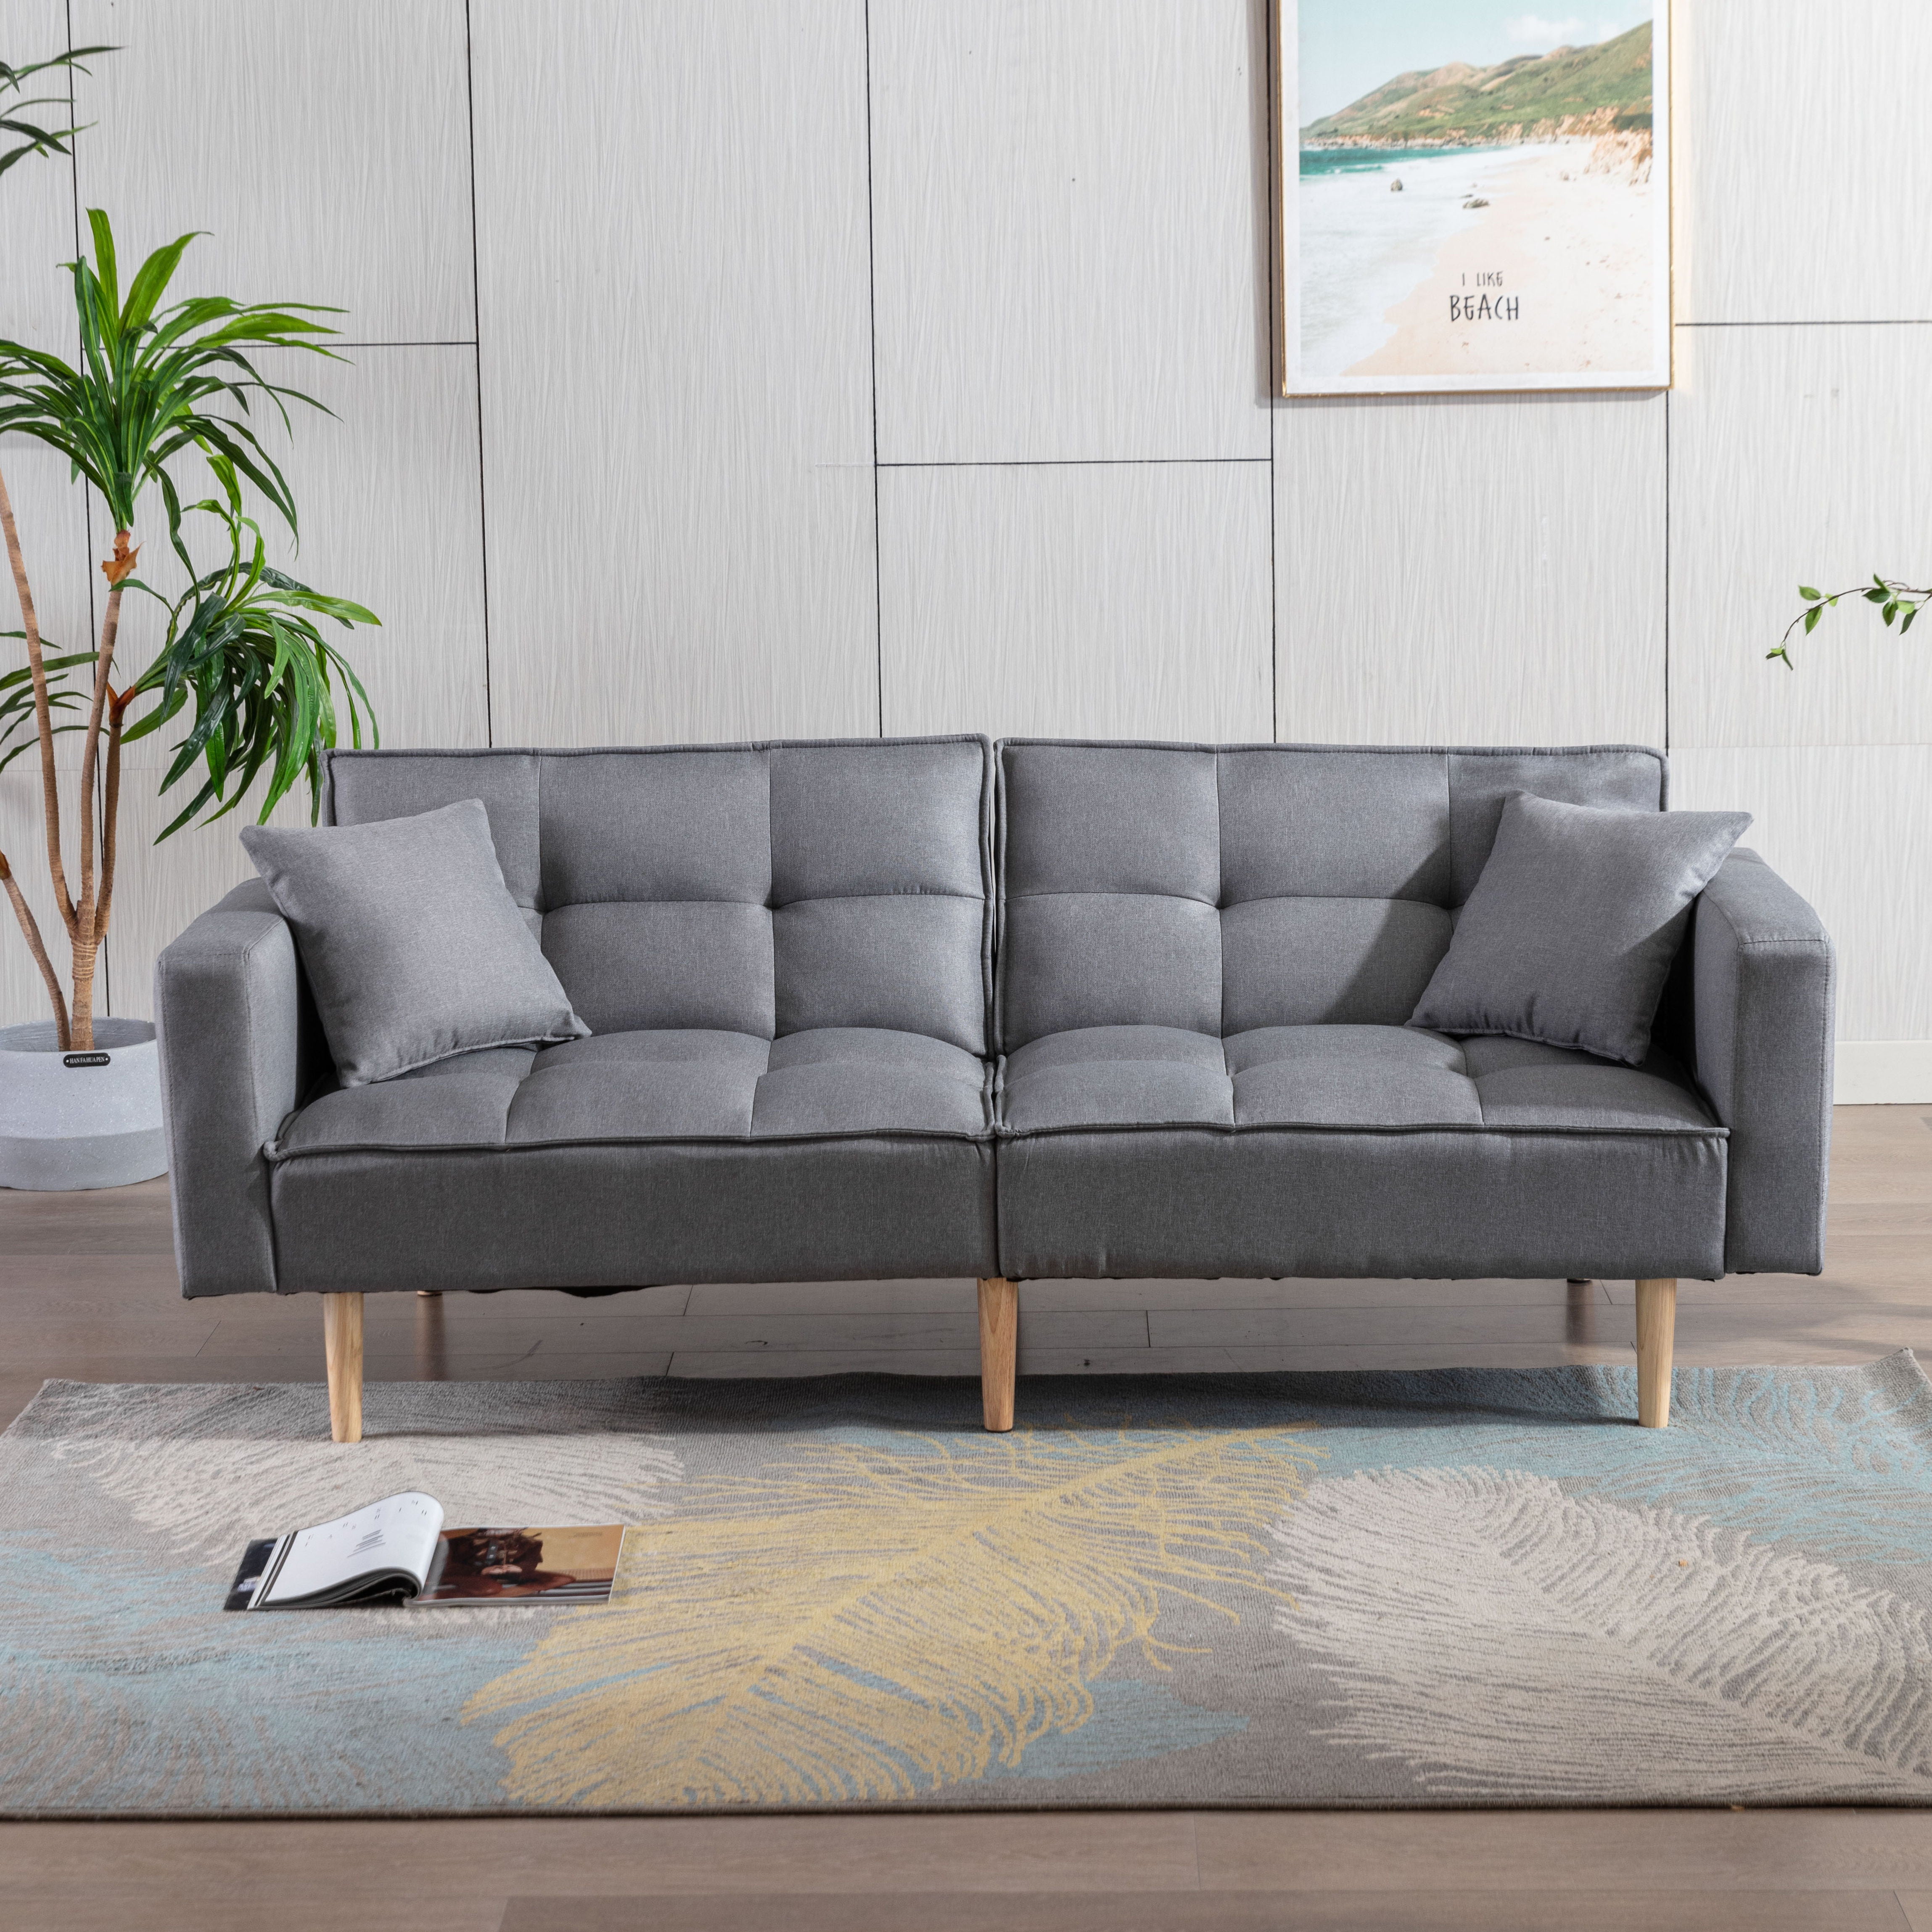 Dongheng Convertible Futon Sofa Bed For Living Room, Linen Sofa With Solid Wooden Legs, Light Gray